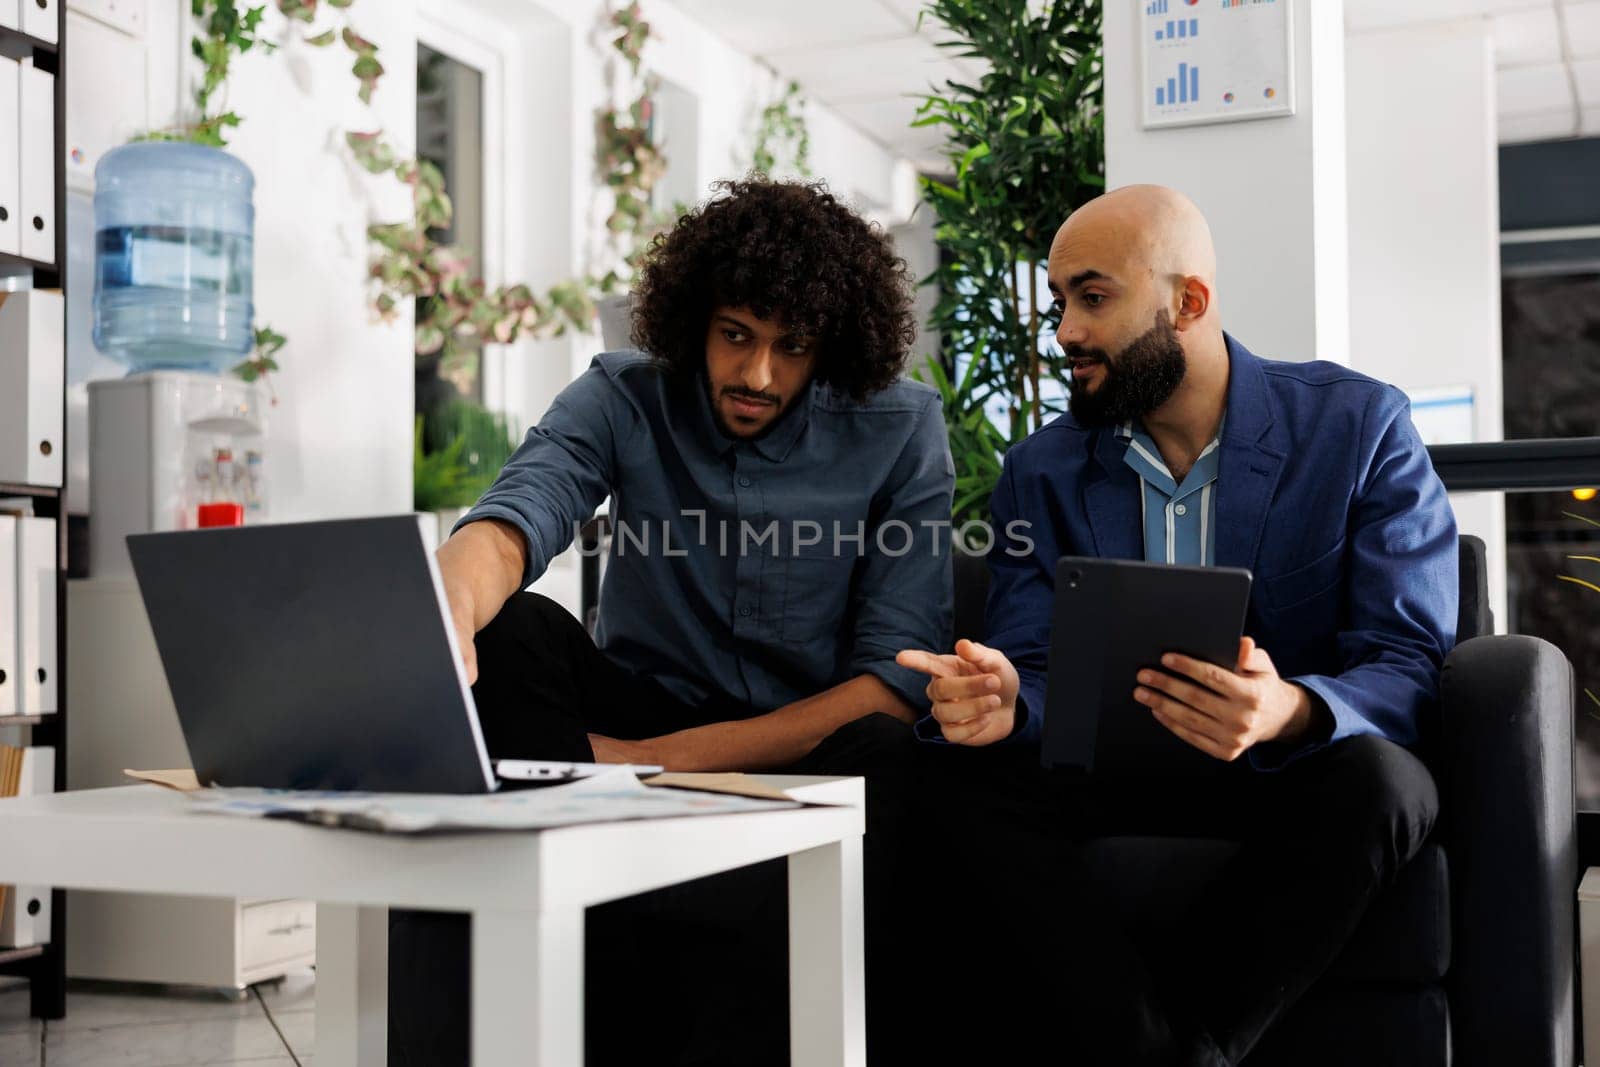 Entrepreneur and colleague discussing project while analyzing data on laptop in business office. Arab employees planning product promotion strategy together in coworking space